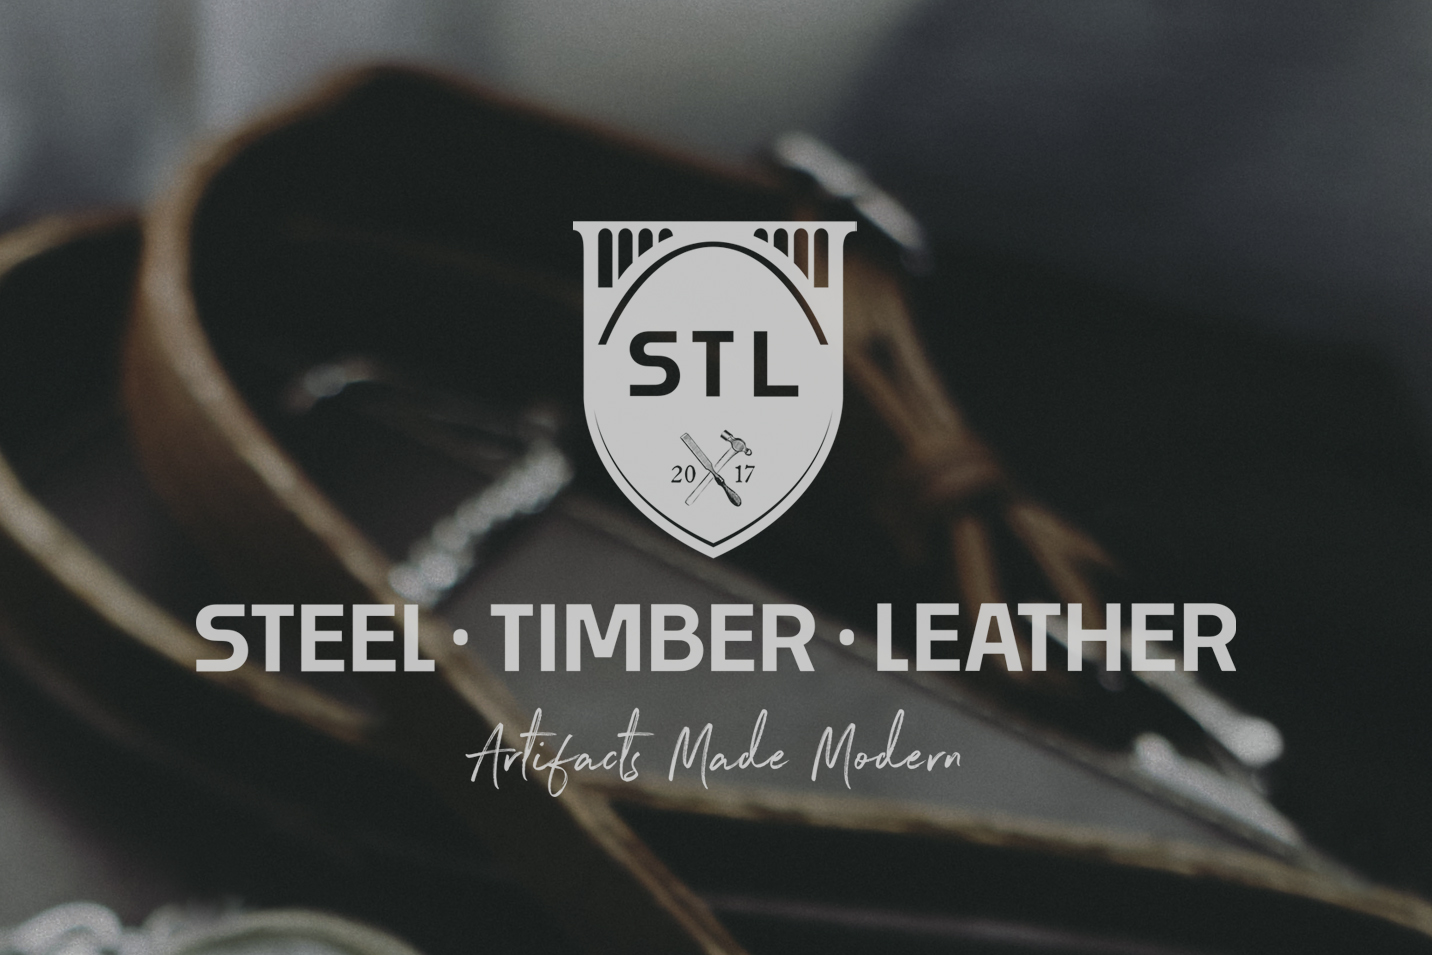 Custom Brand identity and logo design for Steel • Timber • Leather. Artifacts made modern. A visually stimulating logo design creates a brand presence that tells the story of who you are and projects that identity through shape and form.